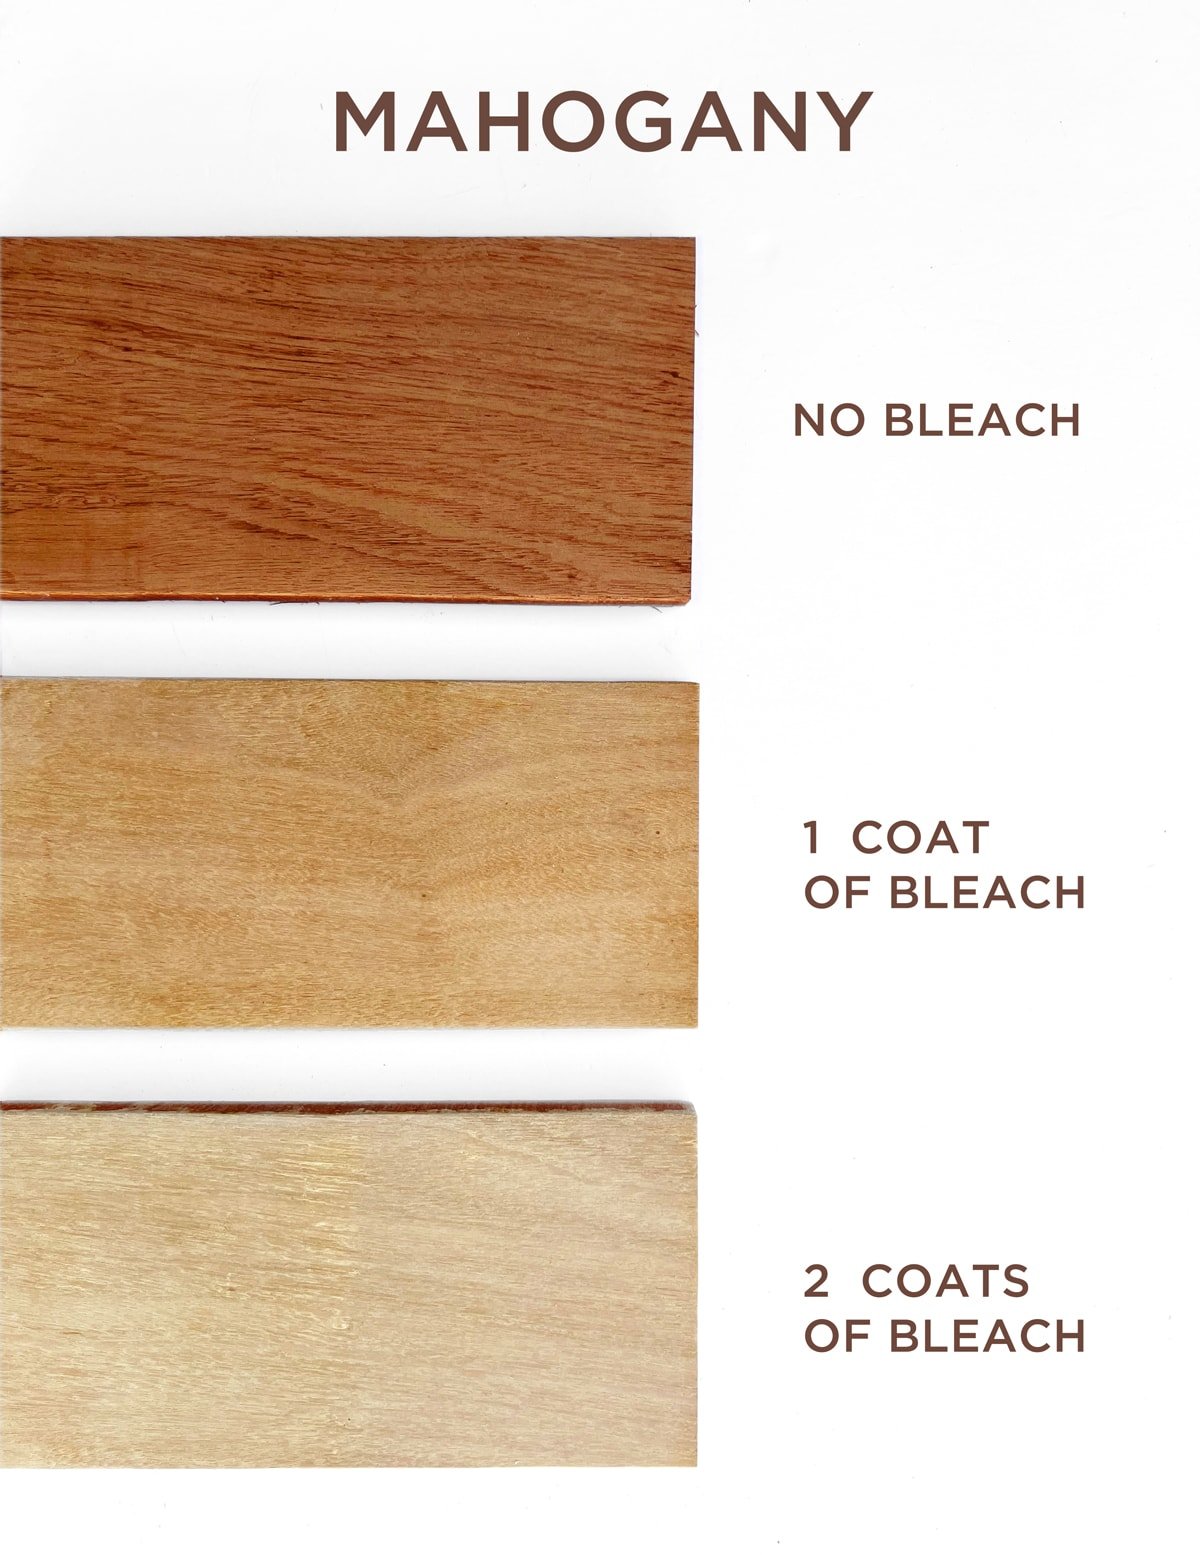 how to bleach mahogany with wood bleach